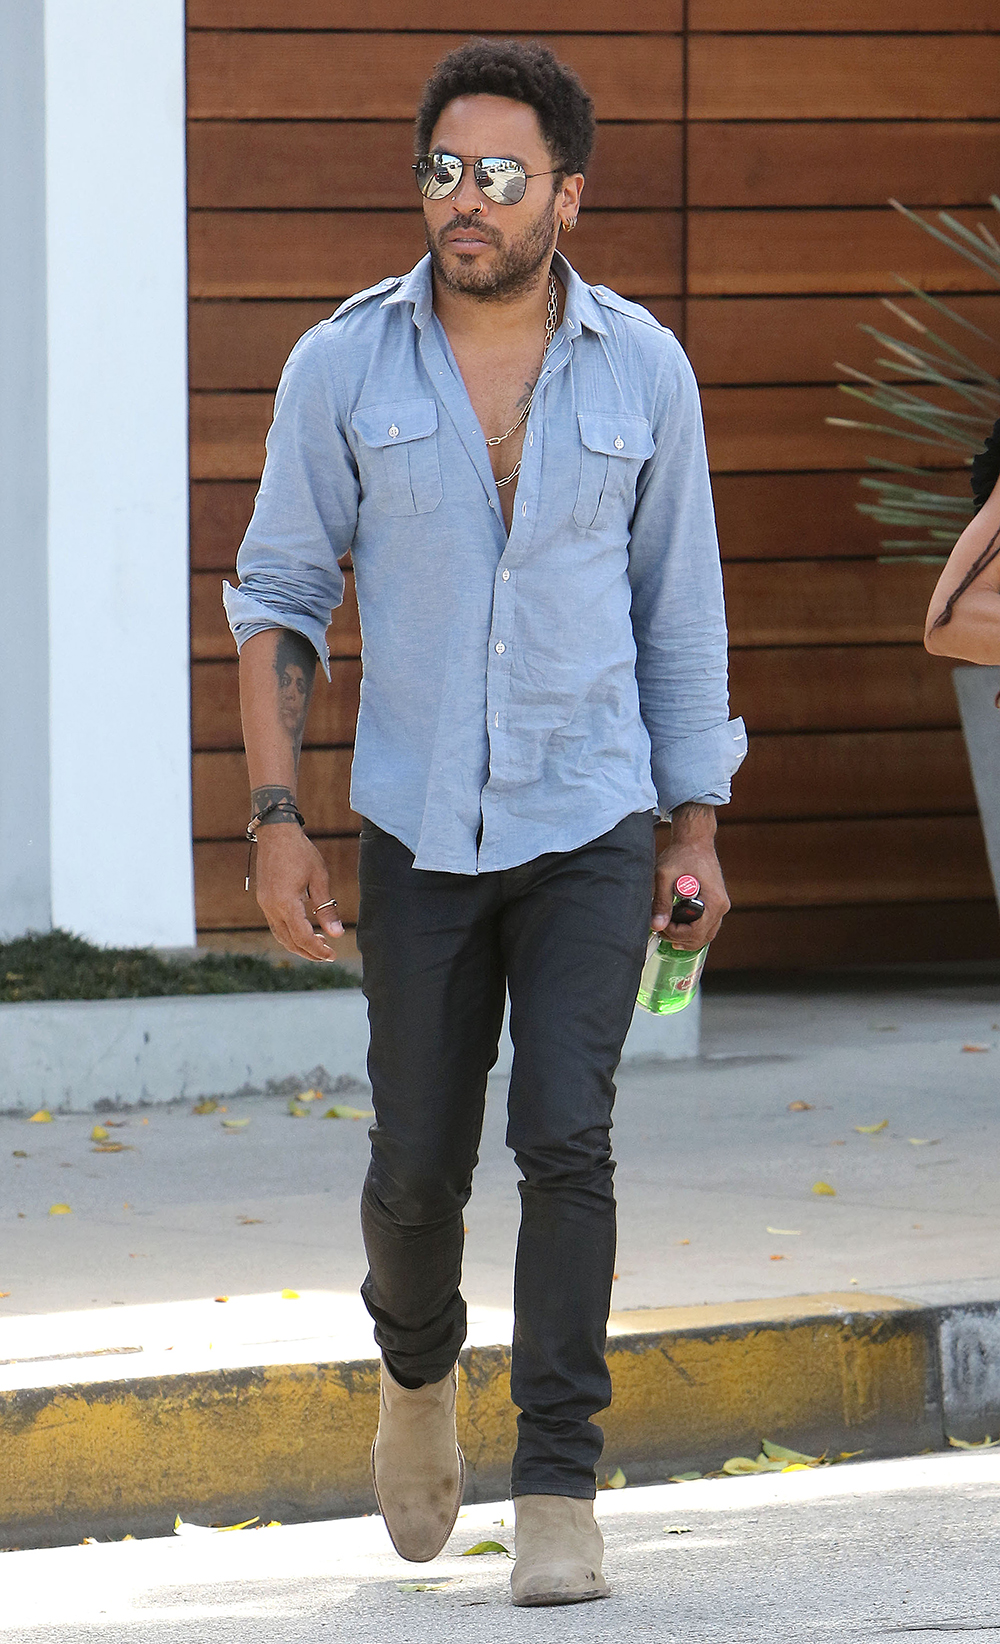 <p>Lenny Kravitz hangs out with ex Lisa Bonet in LA on Mar. 13, 2015. He wore a blue shirt open to reveal his chest.</p>